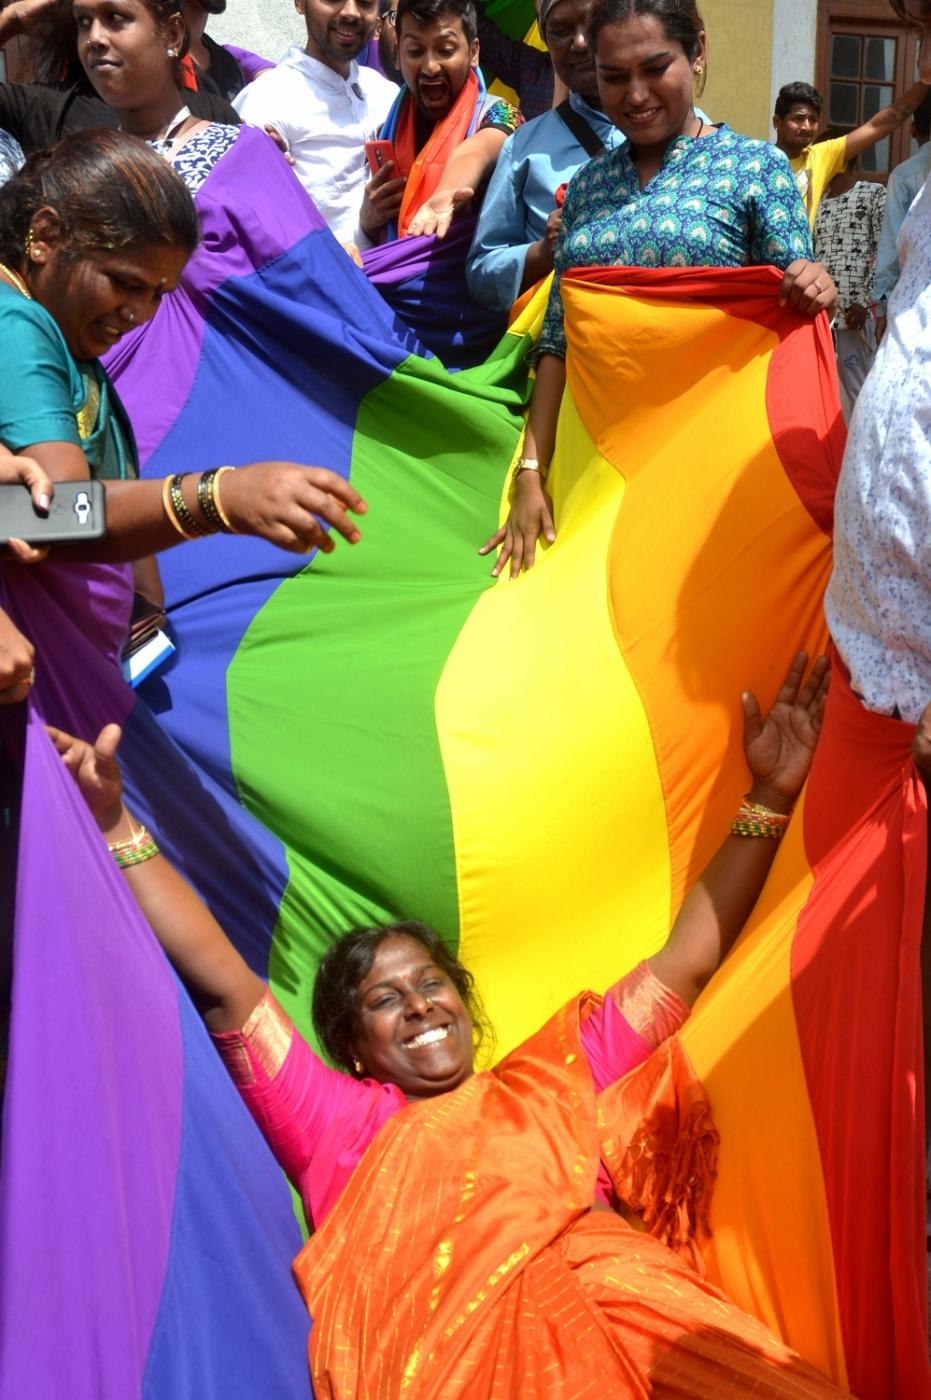 Bengaluru: LGBTIQ (lesbian, gay, bisexual, transgender/transsexual, intersex and queer/questioning) supporters celebrate after the Supreme Court in a landmark decision decriminalised homosexuality by declaring Section 377, the penal provision which criminalised gay sex, as "manifestly arbitrary"; in Bengaluru on Sept 6, 2018. (Photo: IANS) by .